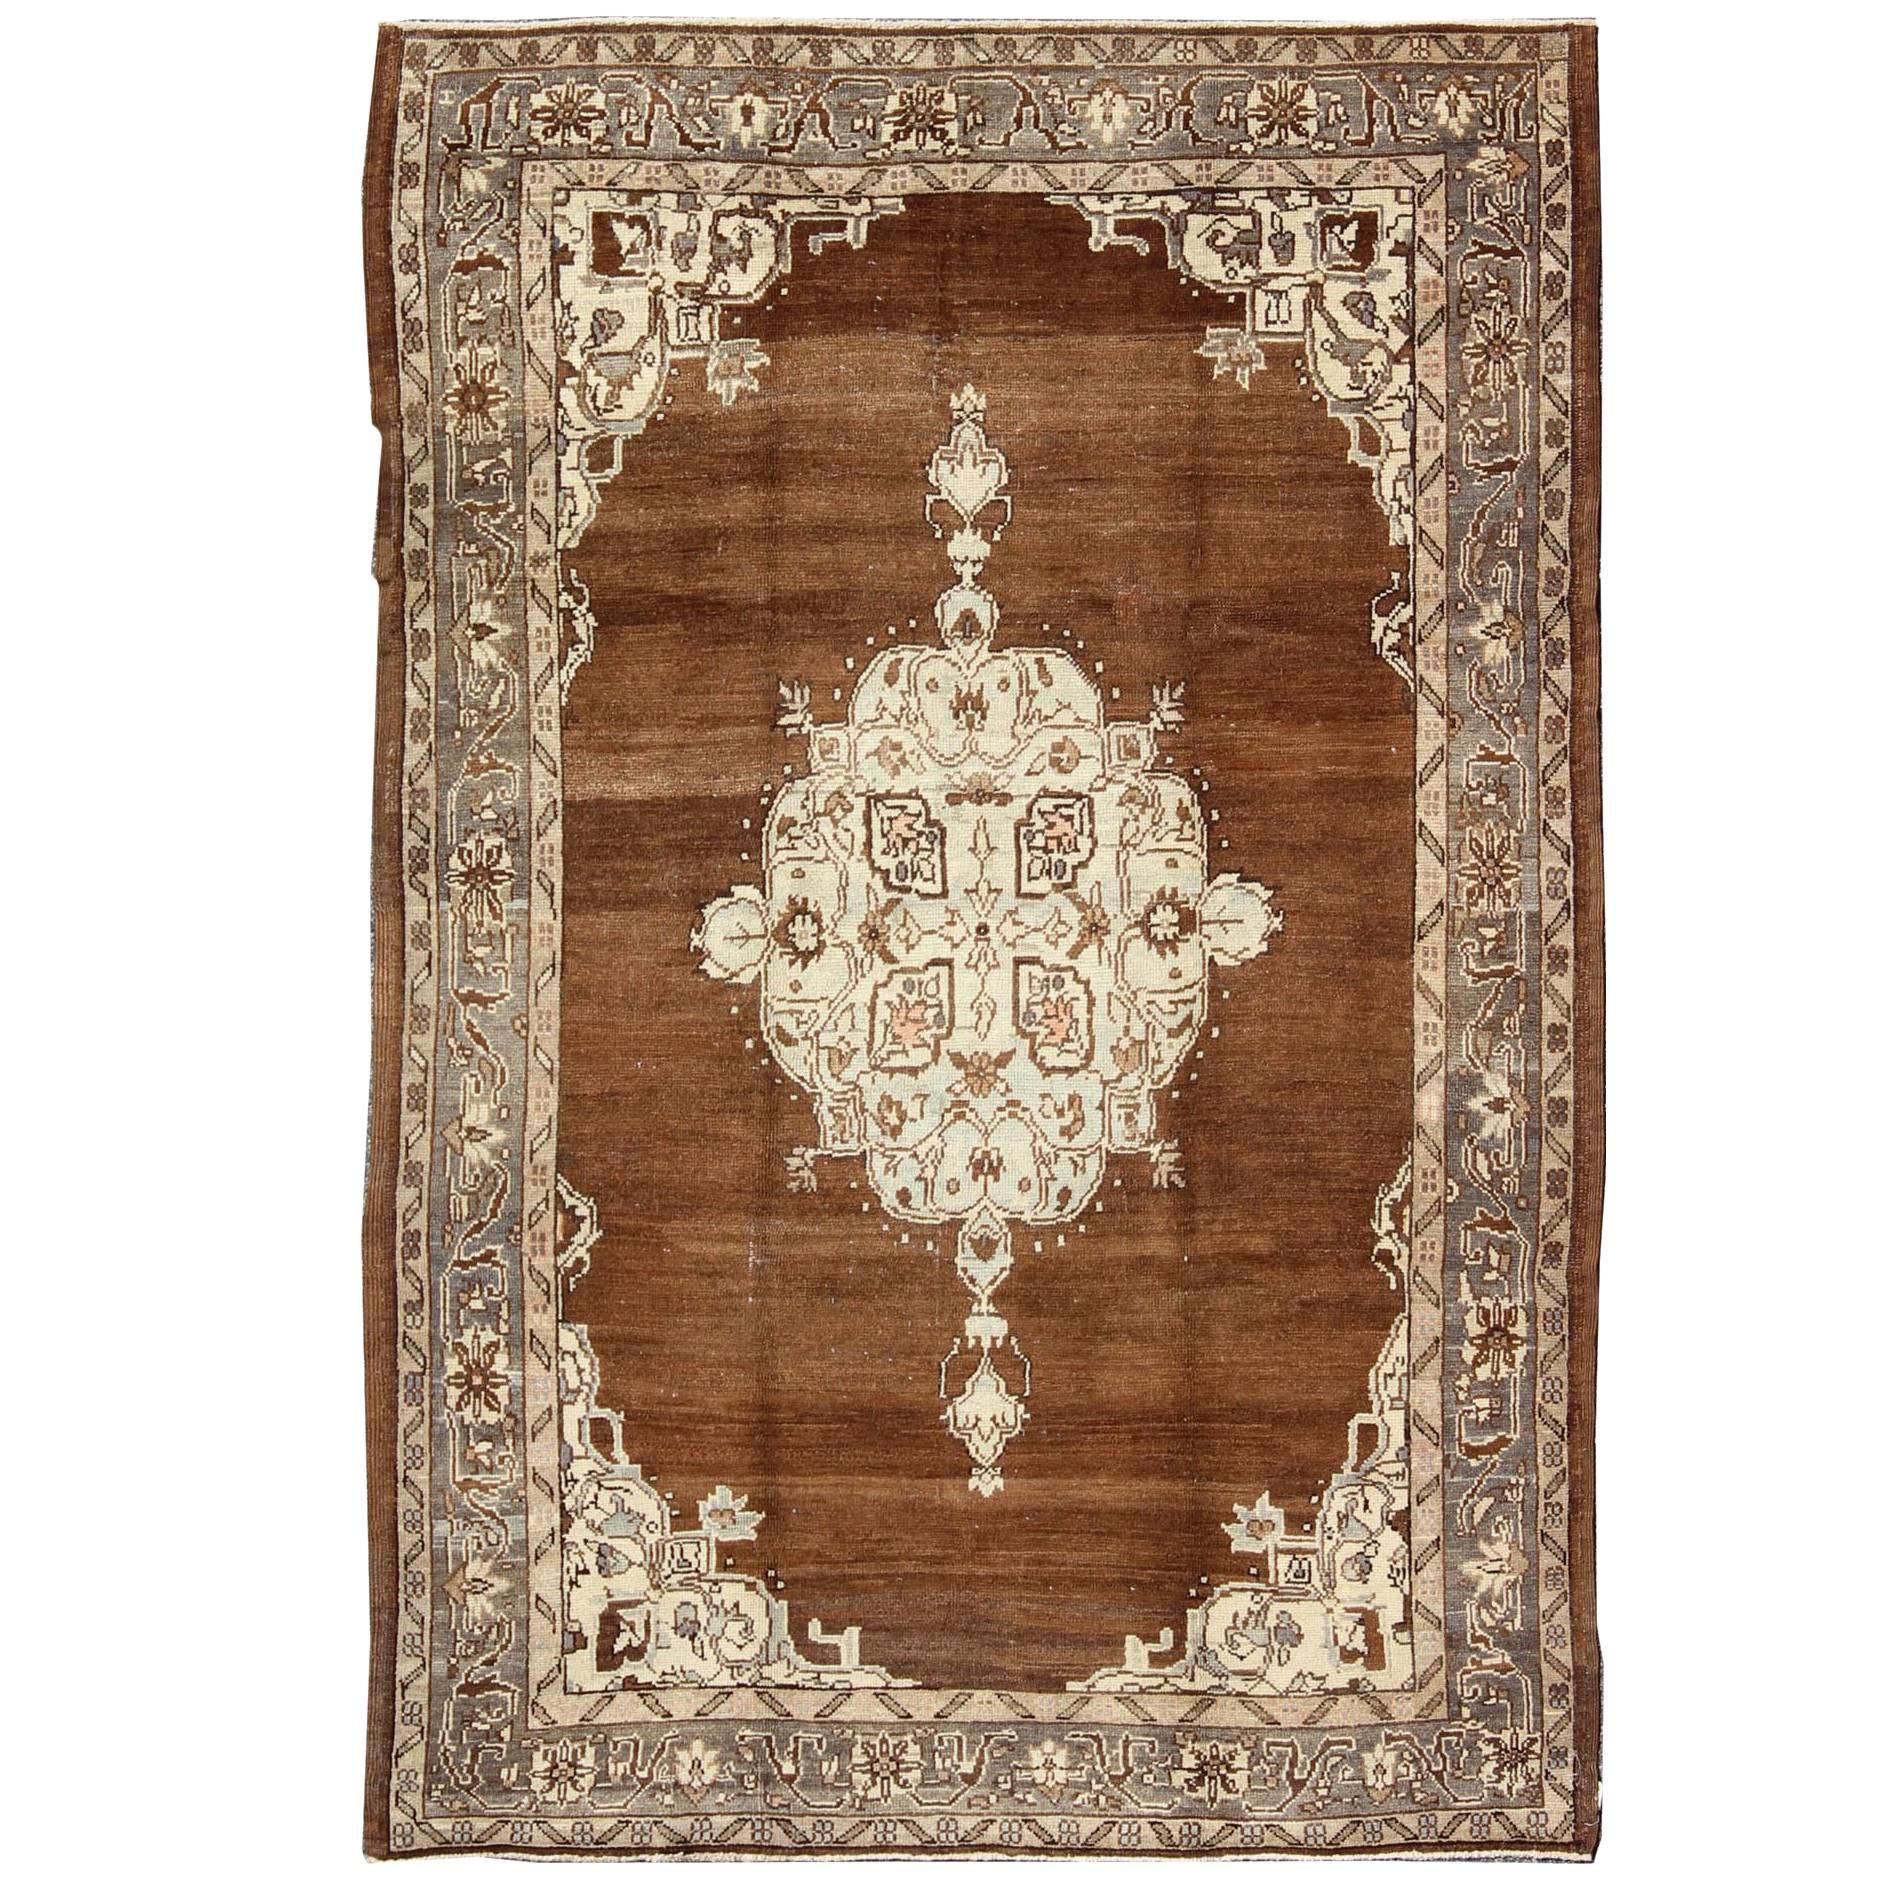 Vintage Turkish Oushak Rug with Floral Motifs in Chocolate Brown, Ivory, Taupe